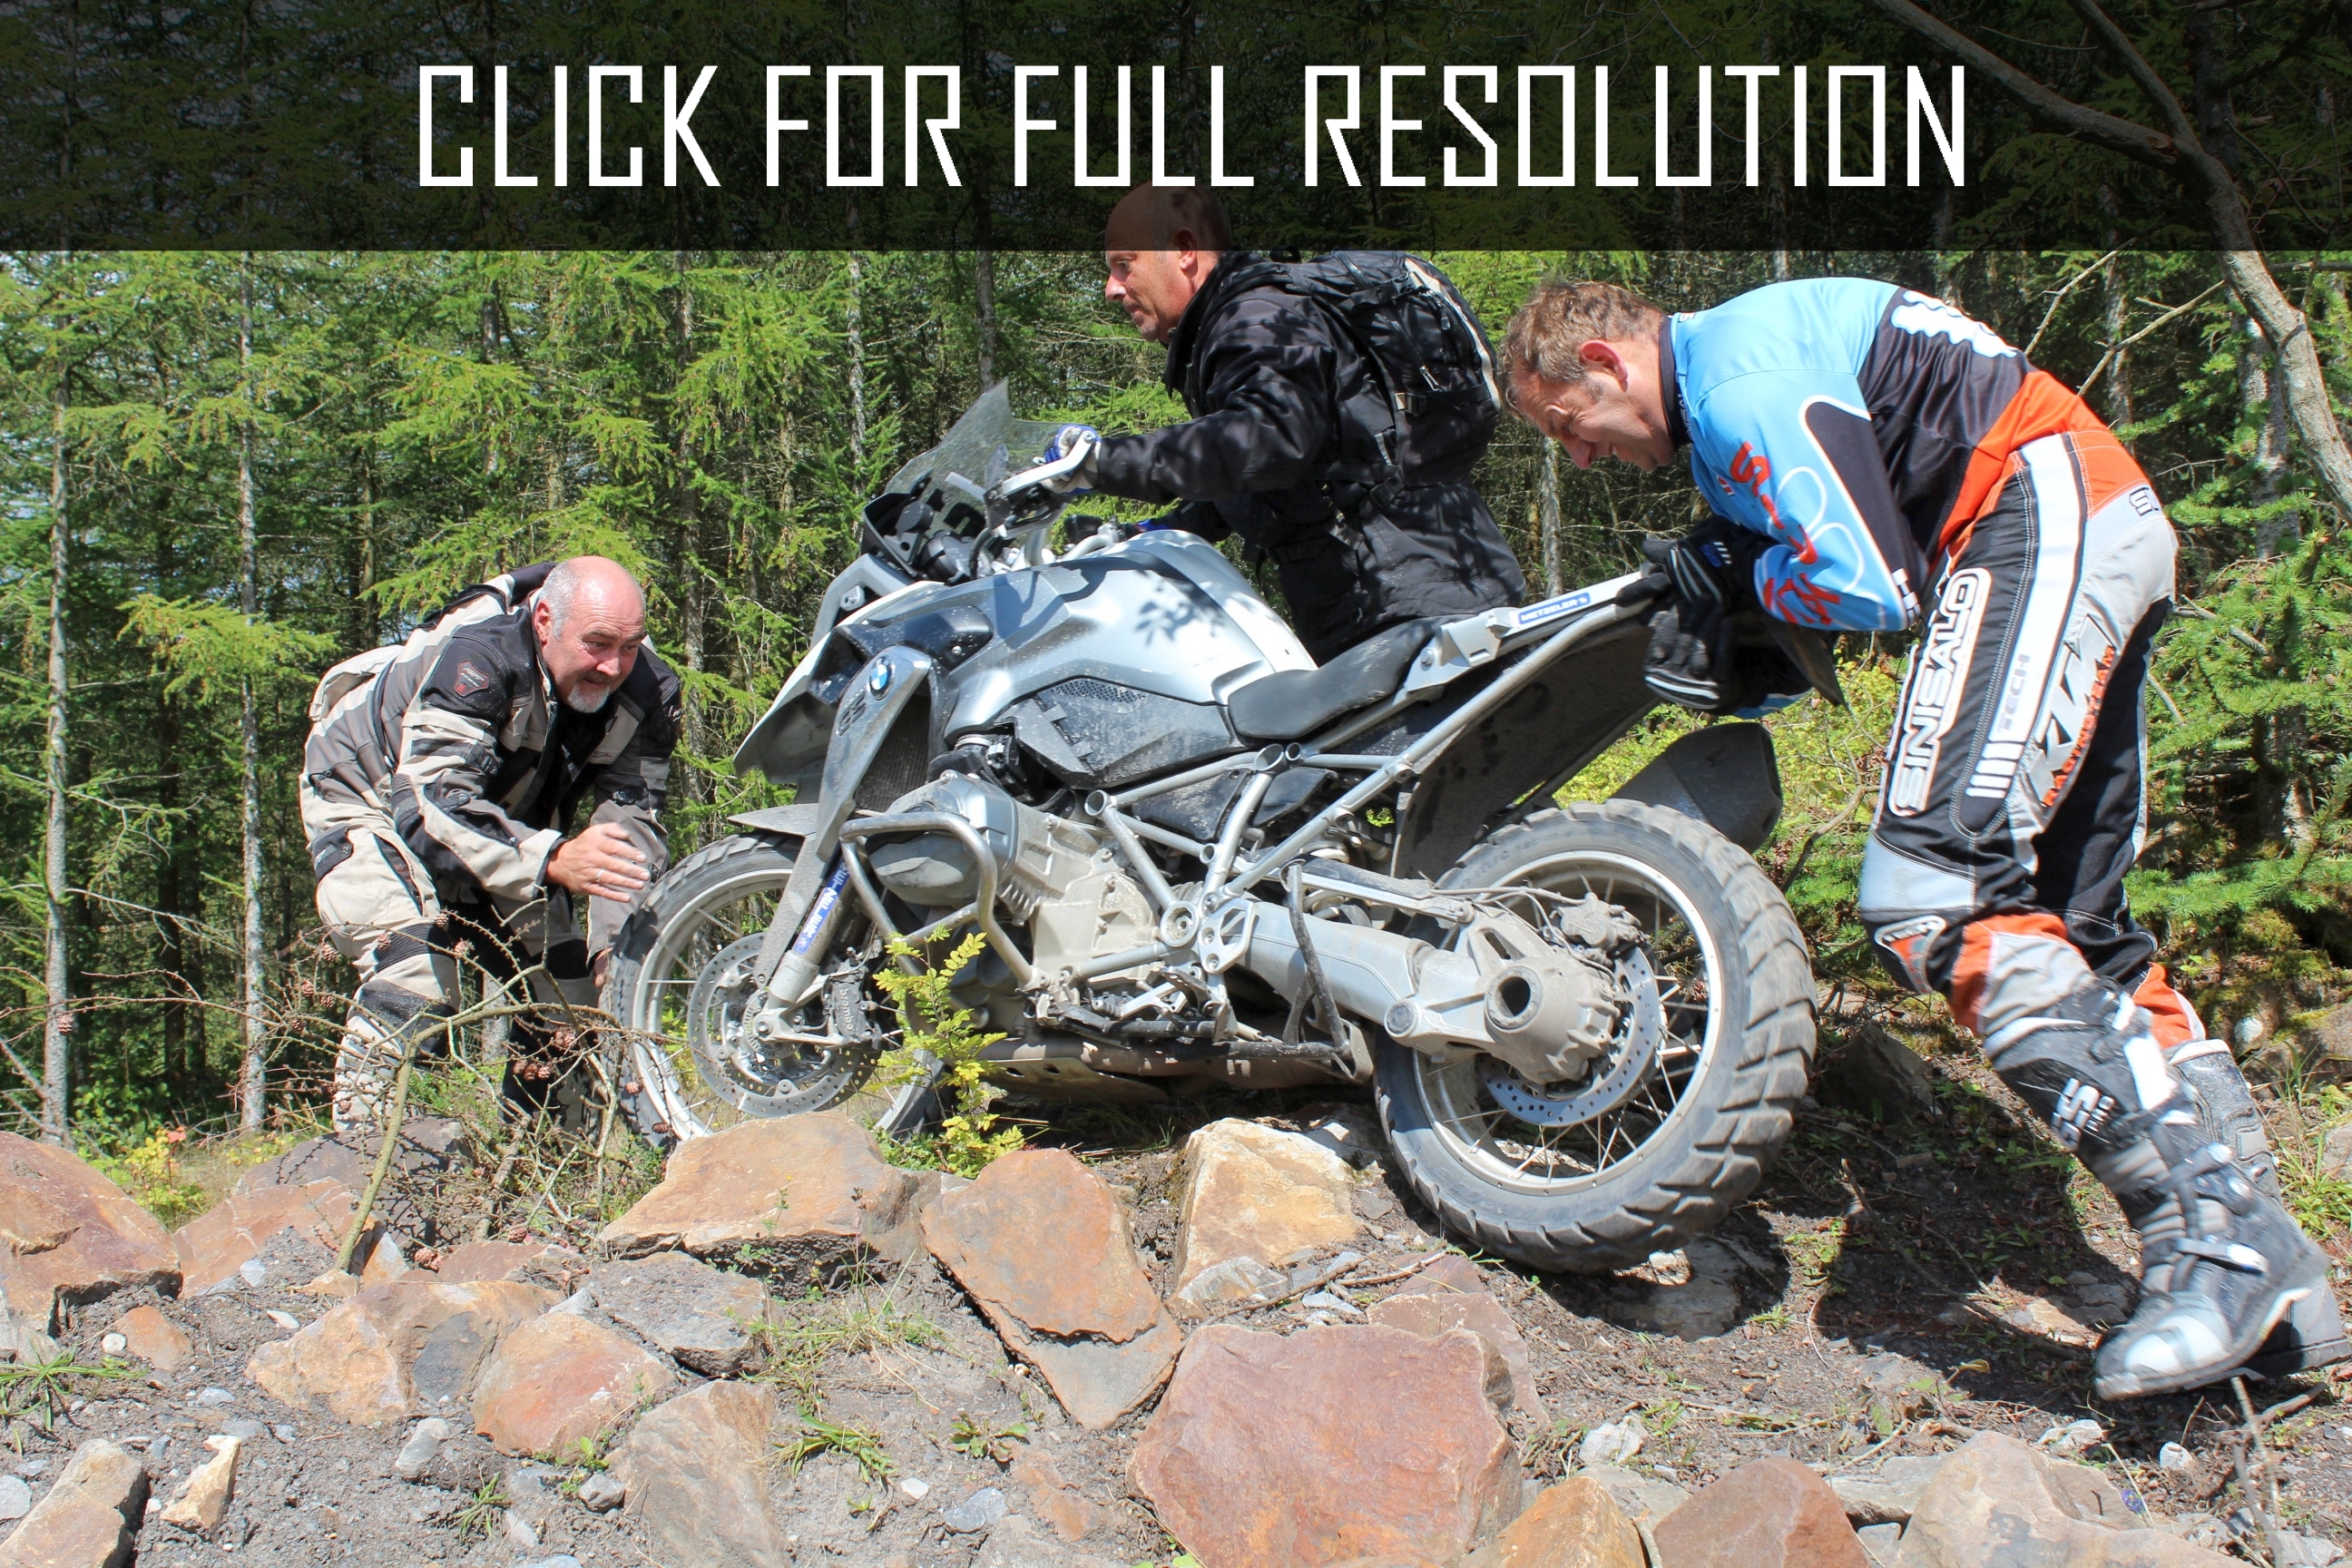 Bmw Gs Off Road